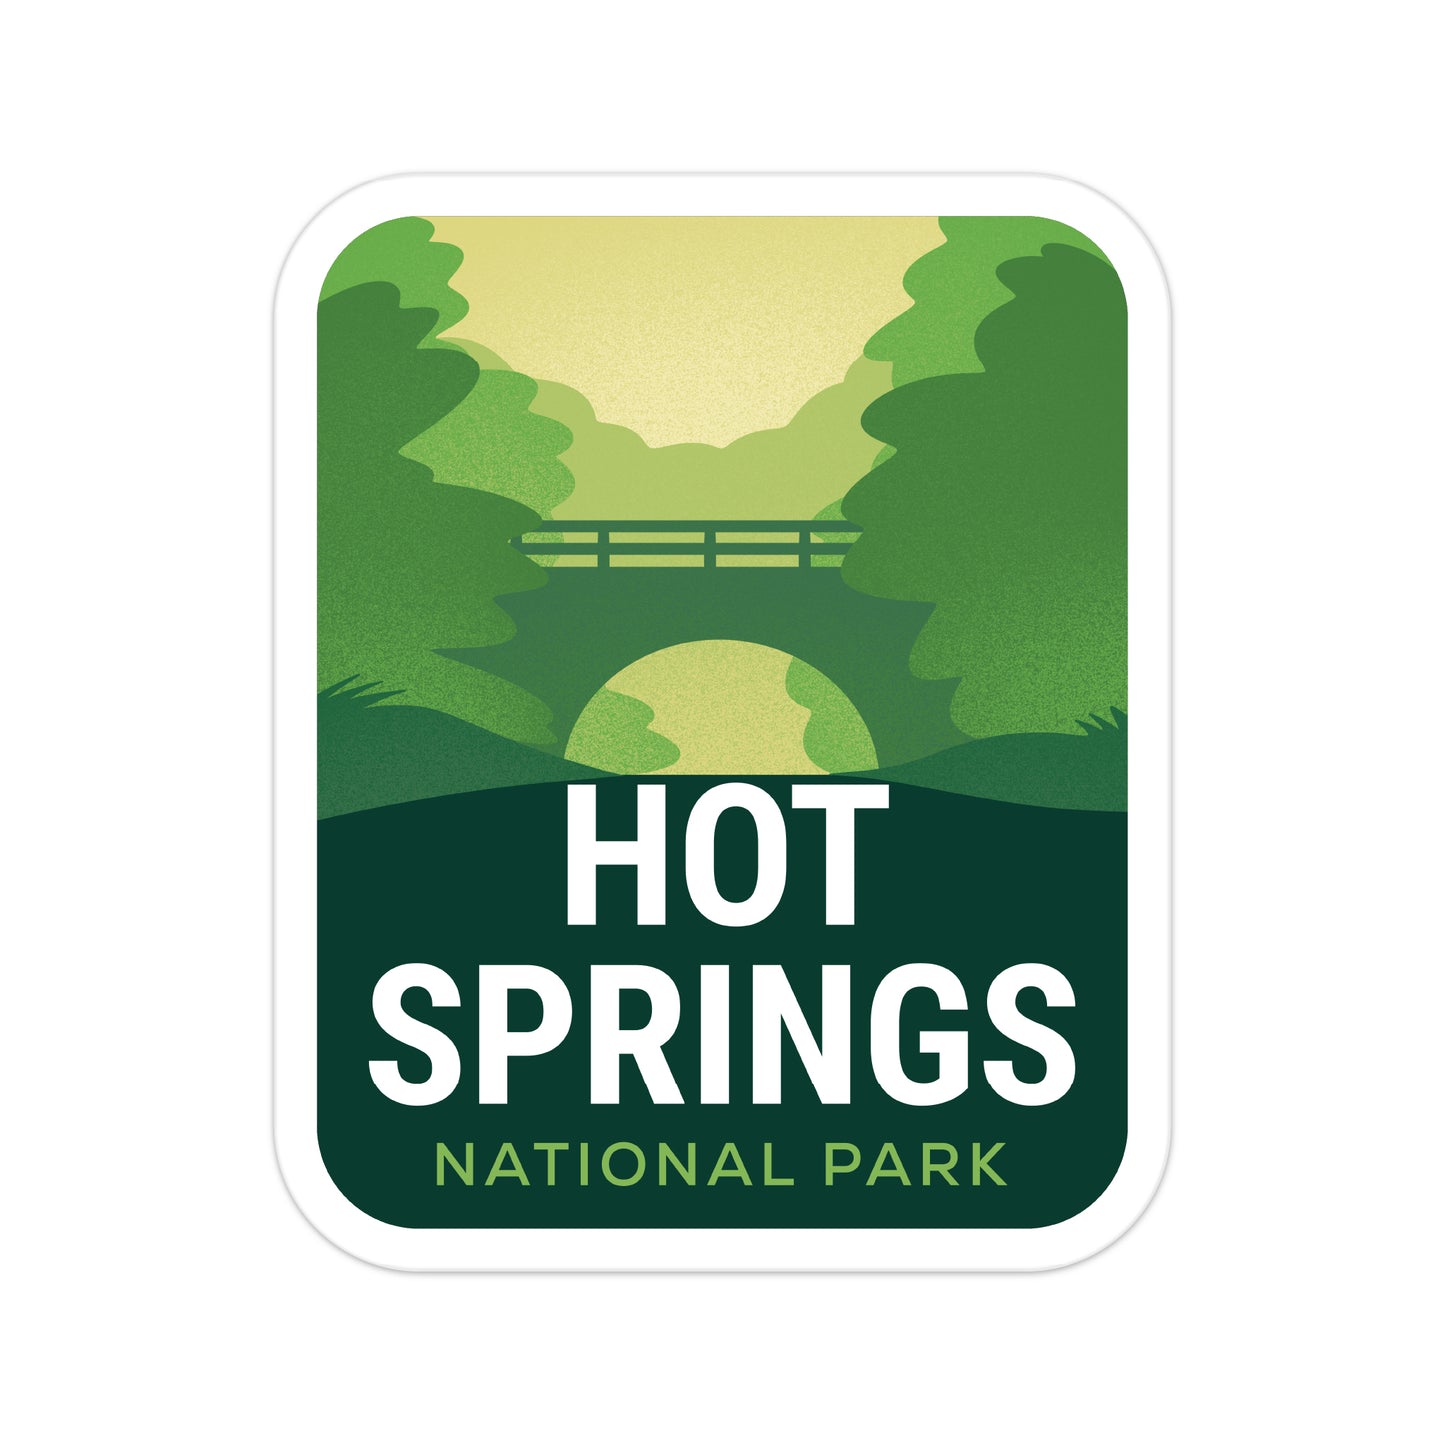 A sticker of Hot Springs National Park